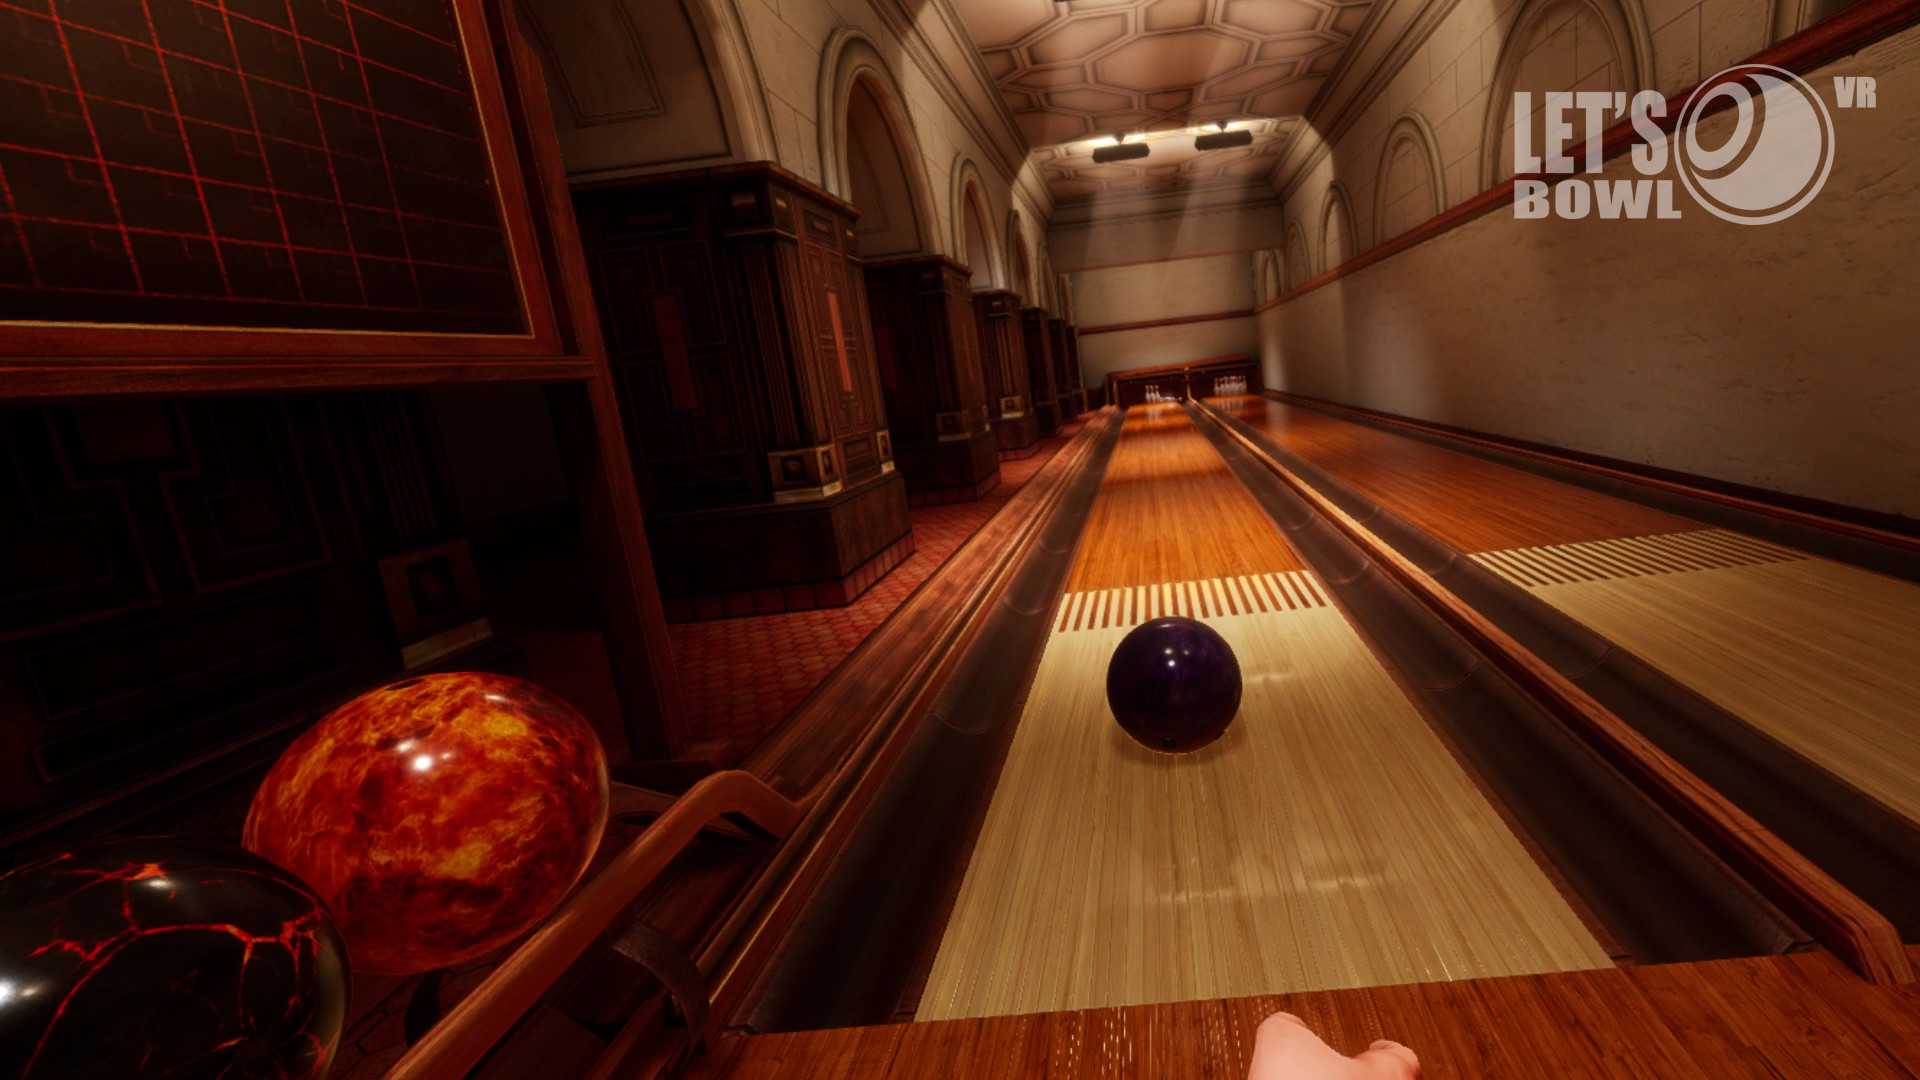 Let's Bowl VR - Bowling Game